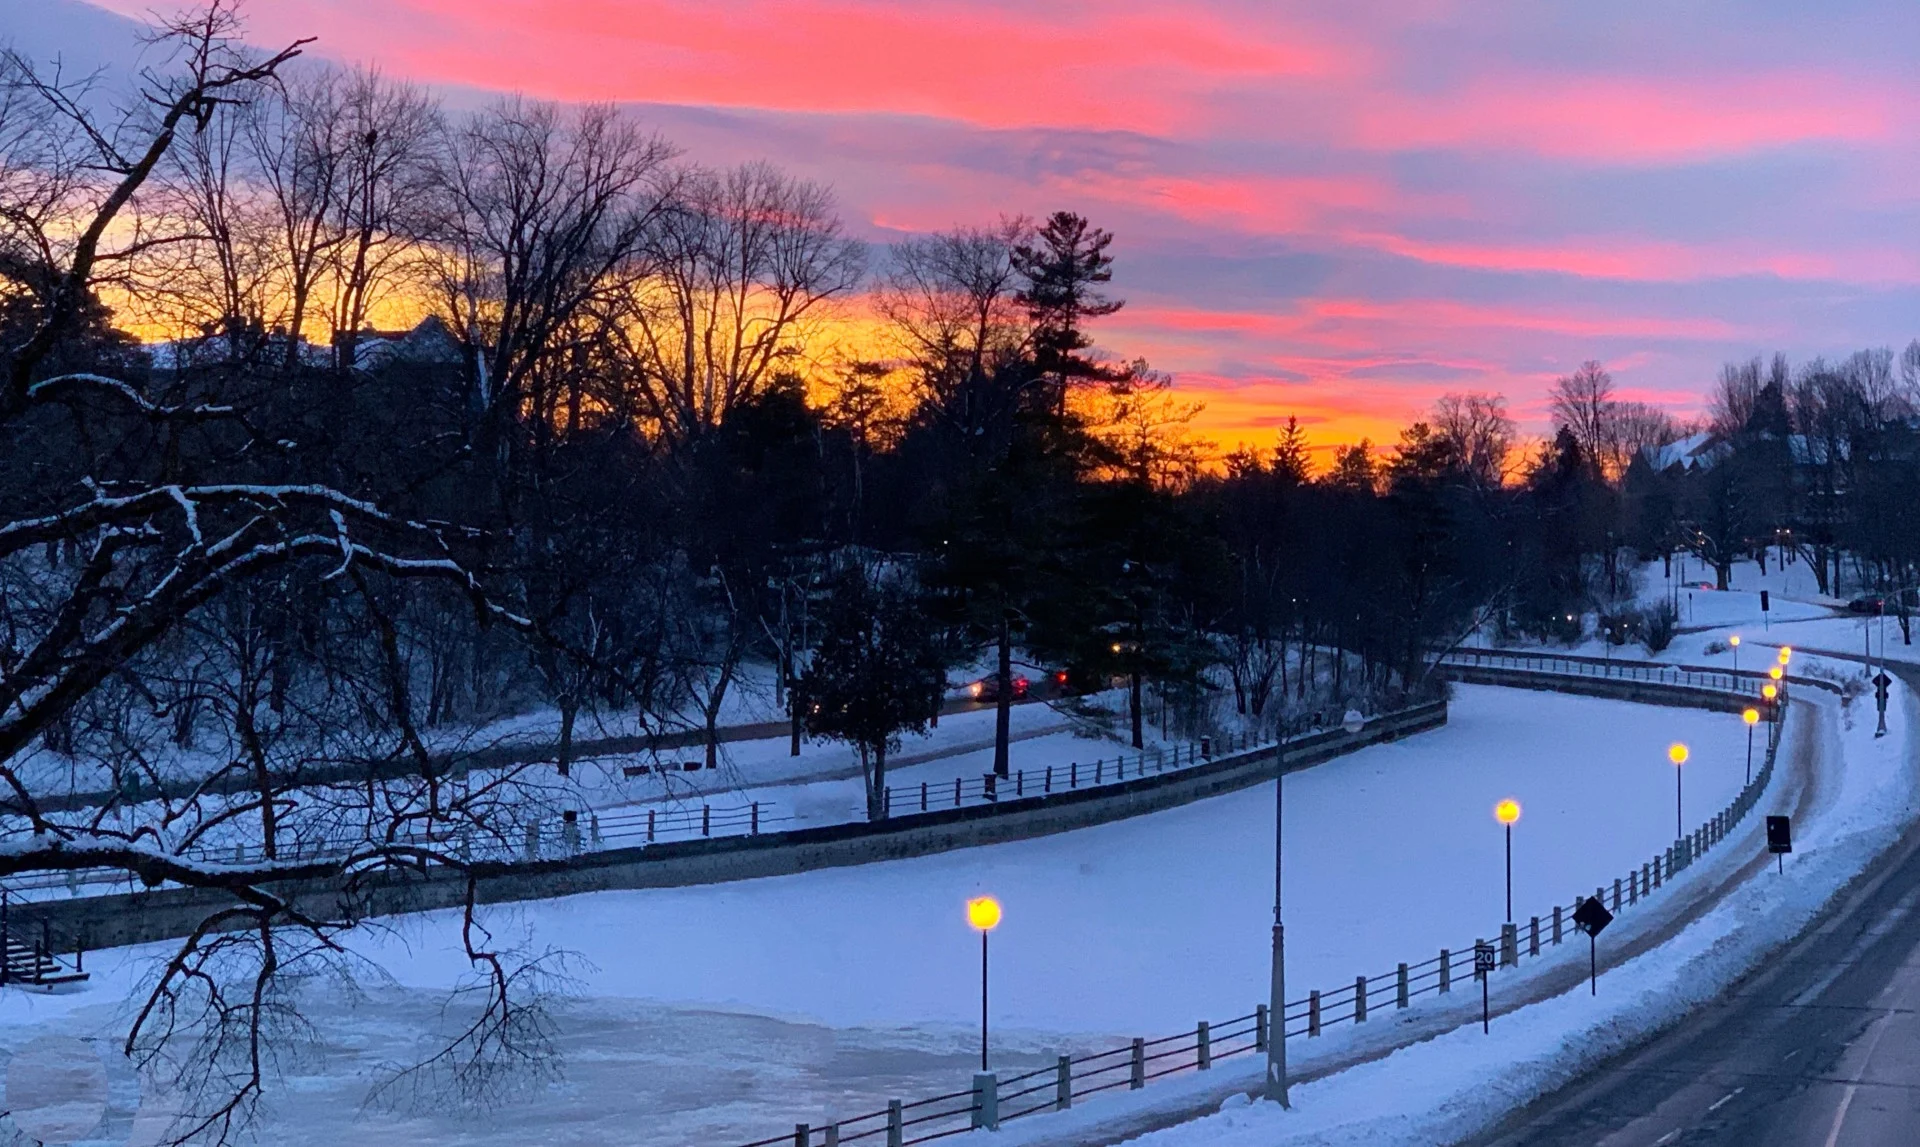 The Rideau Canal Skateway is finally reopening on Sunday